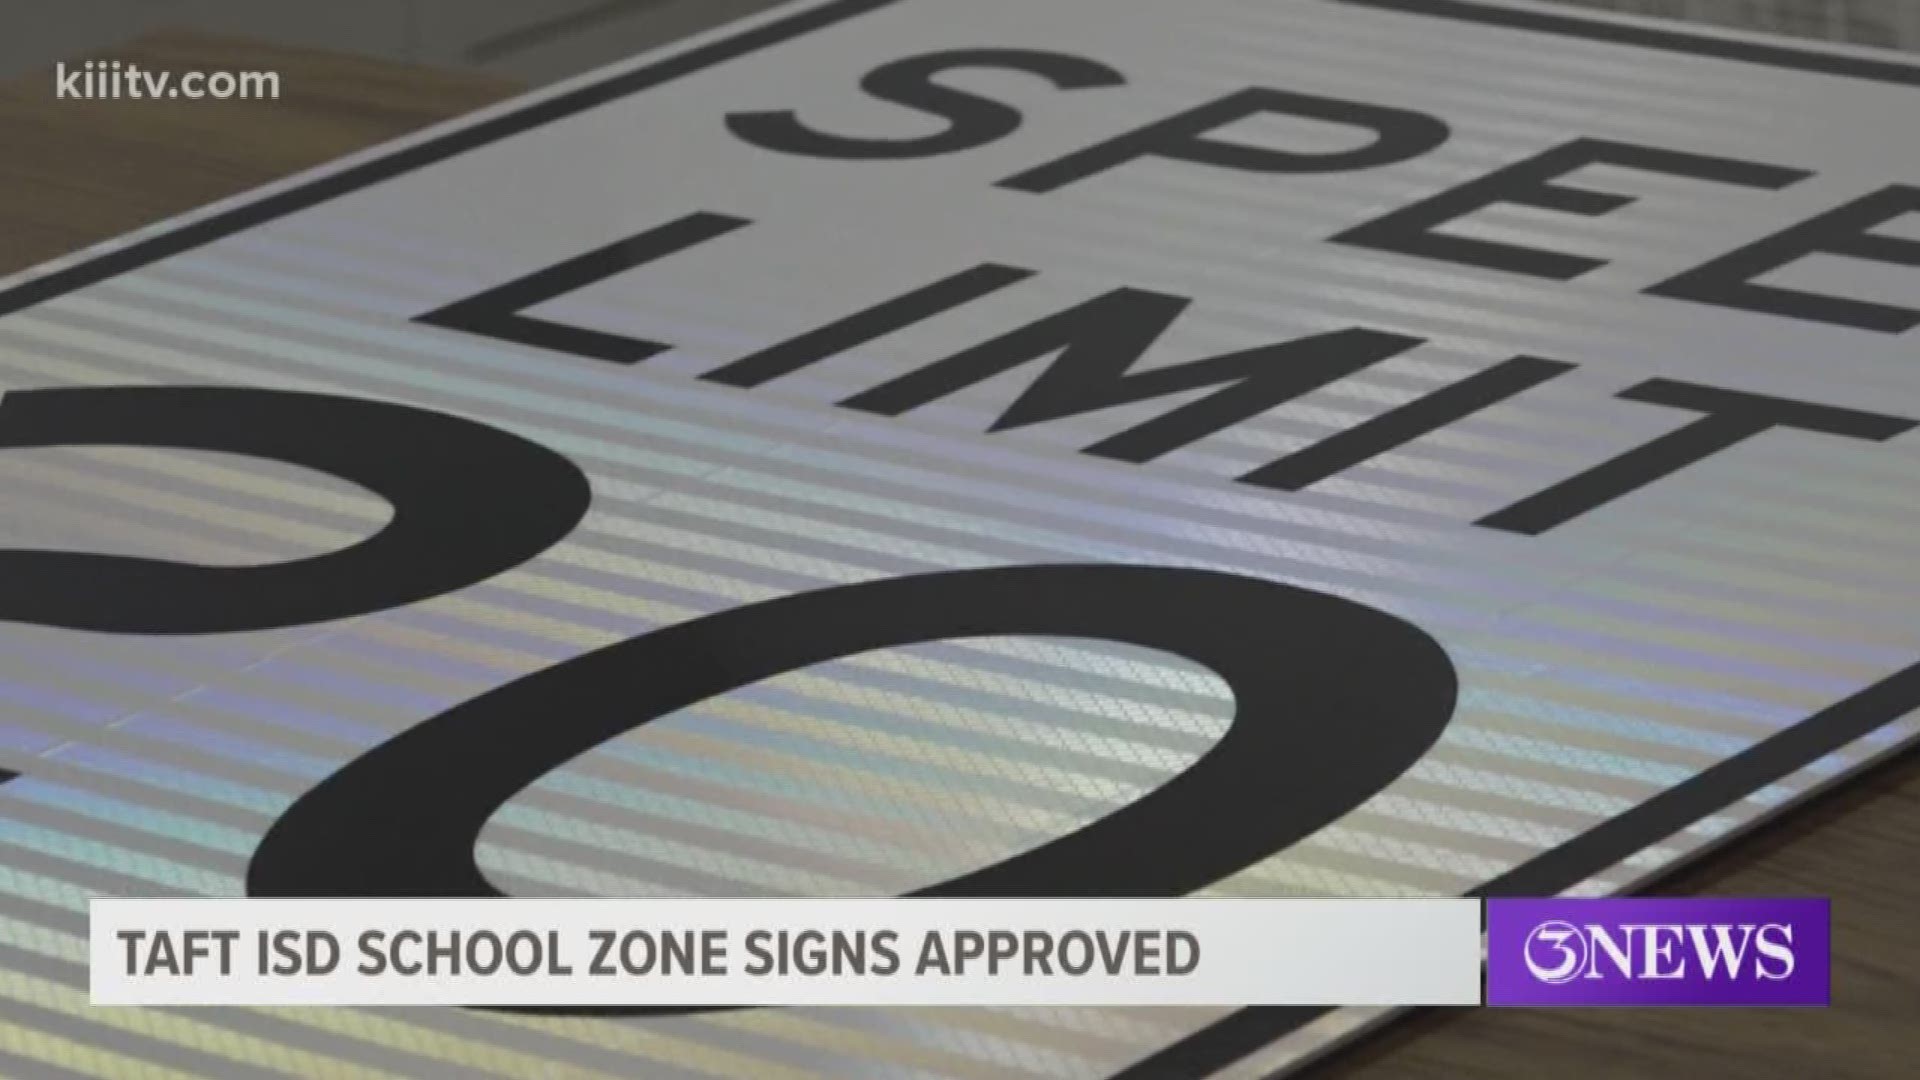 San Patricio County commissioners have approved the installation of needed safety signs in front of one elementary school in Taft, Texas.